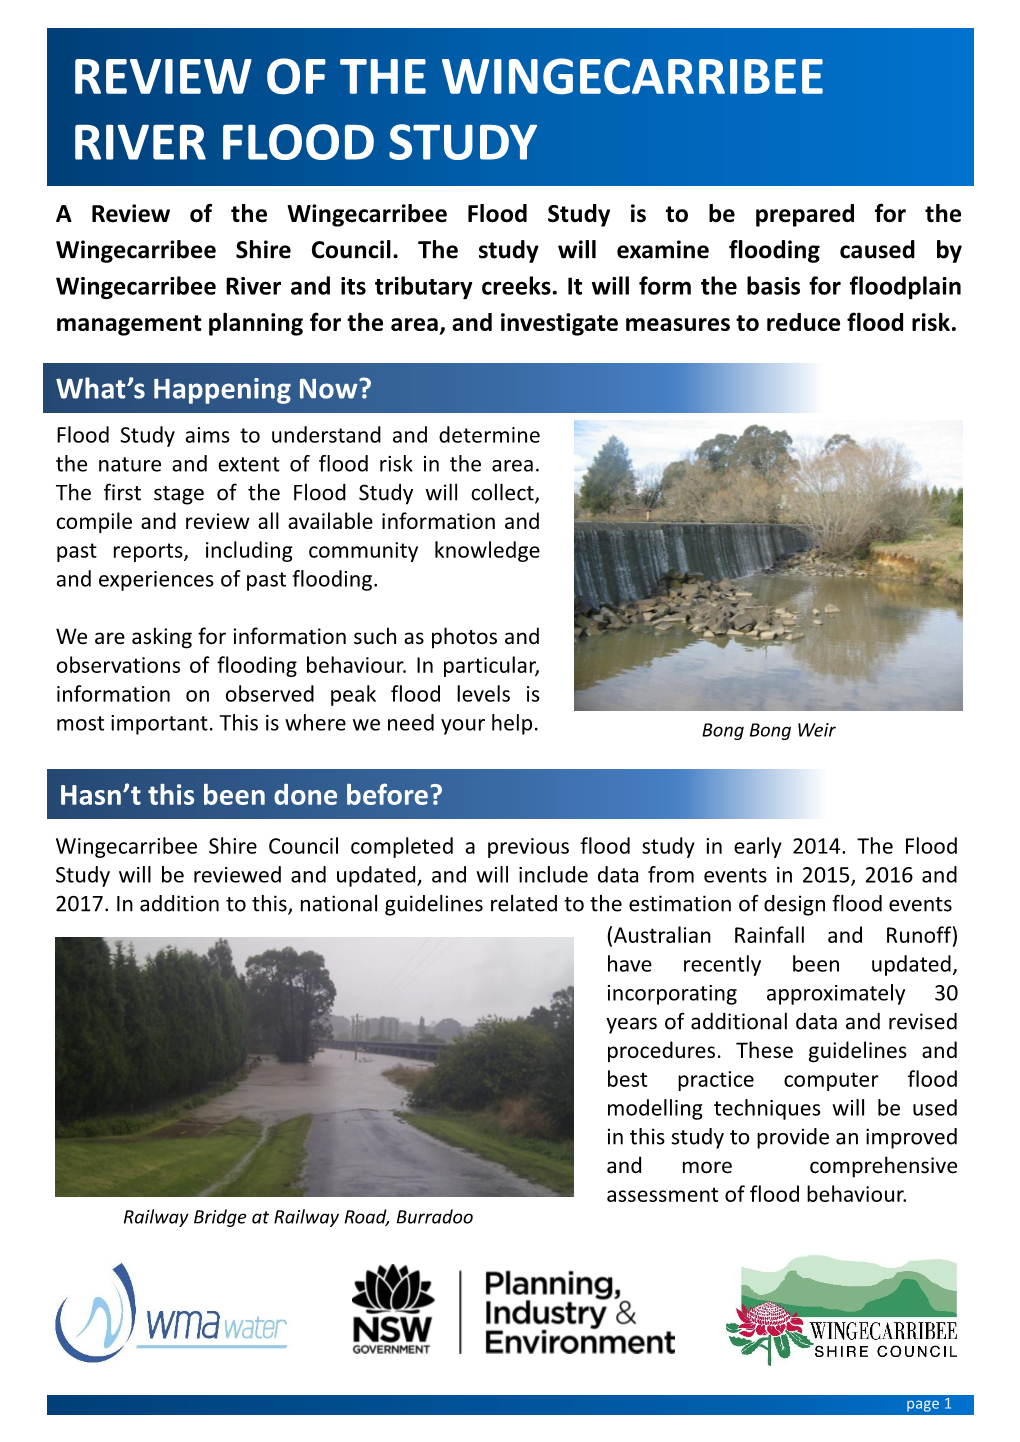 Review of the Wingecarribee River Flood Study